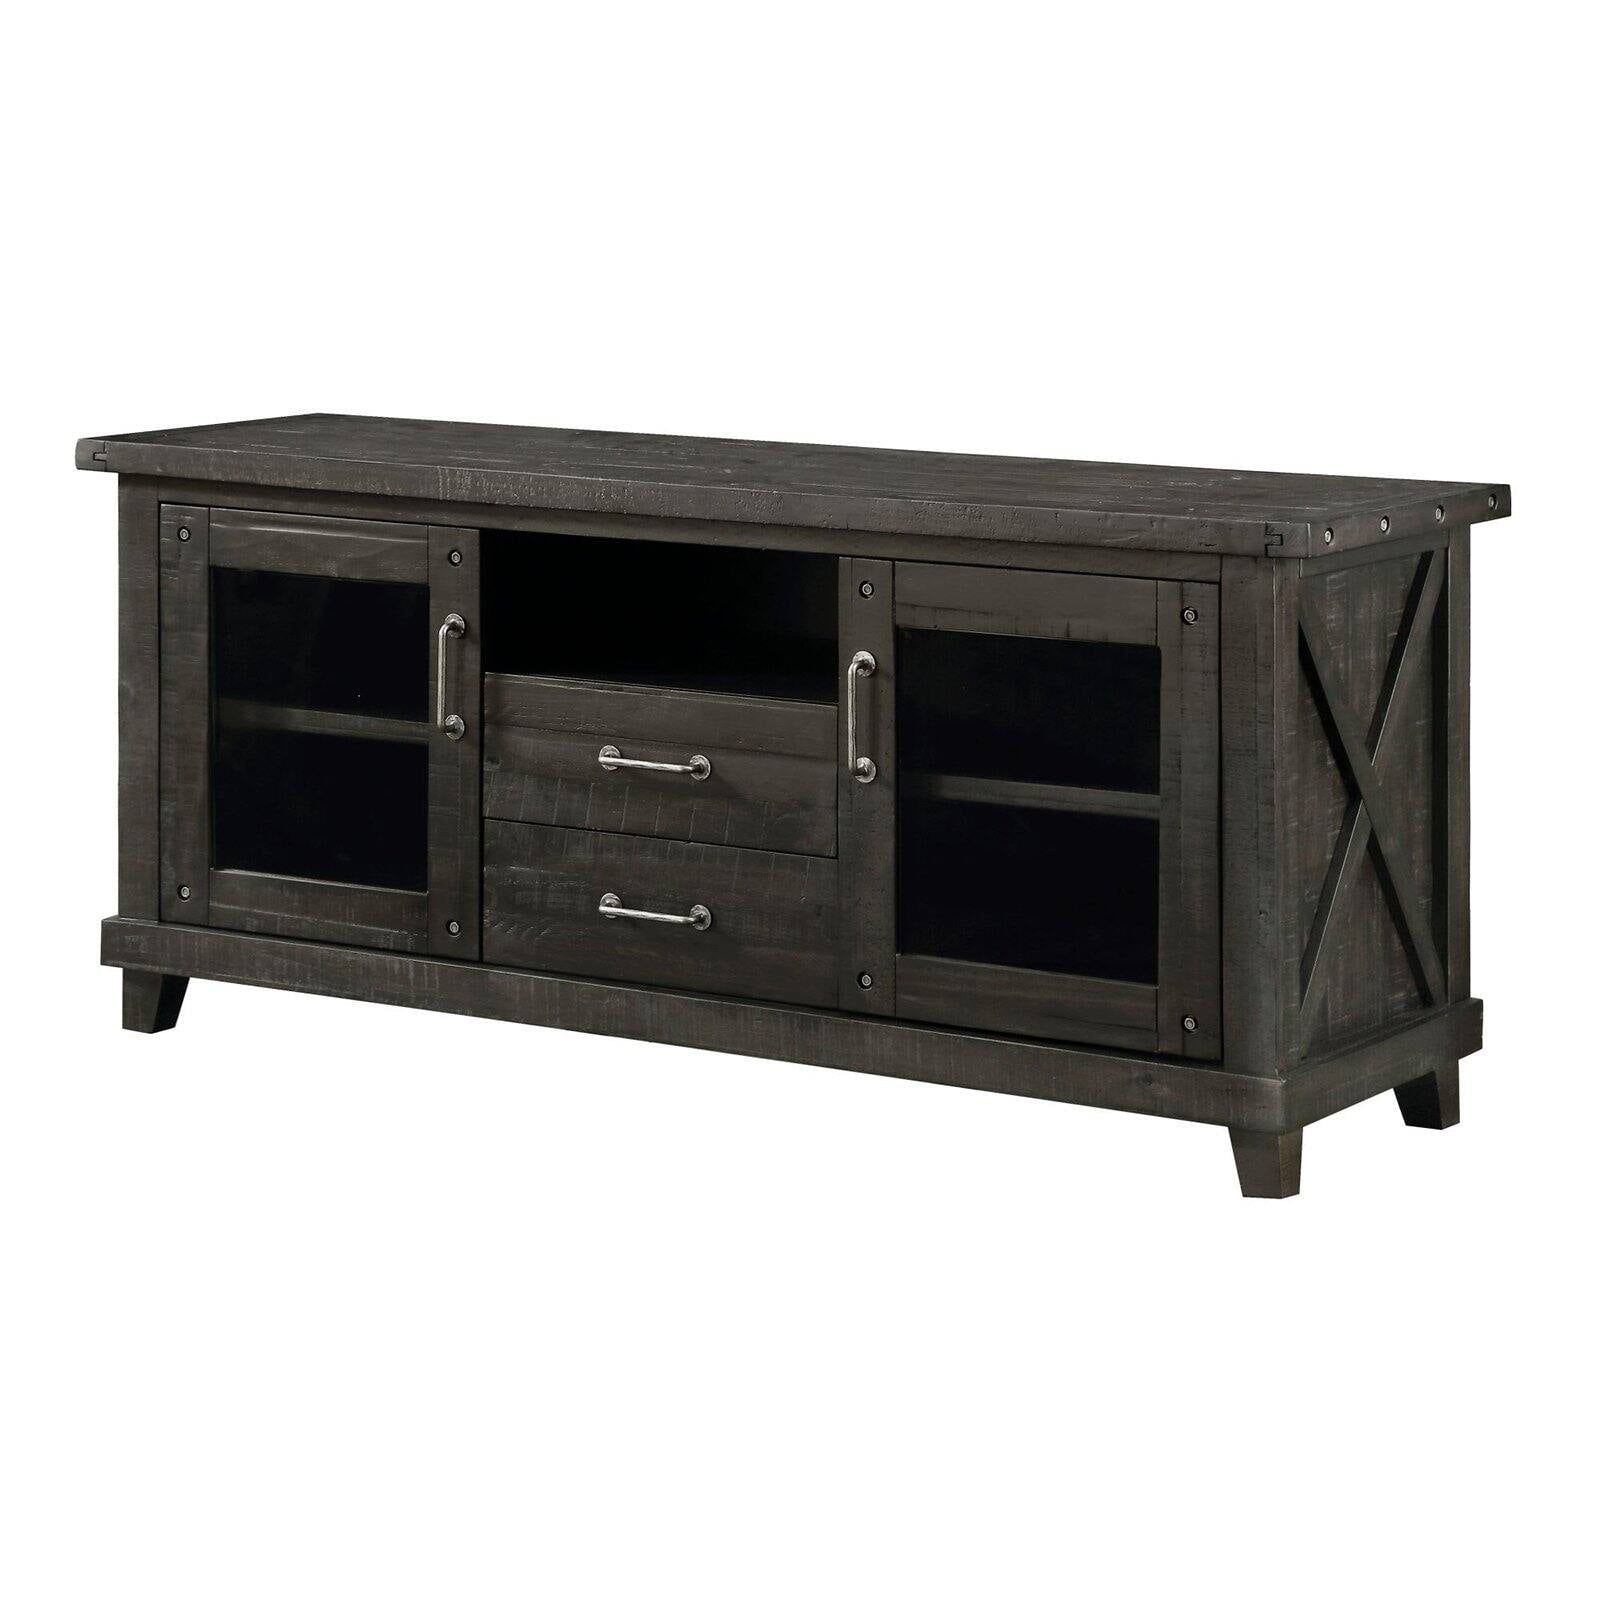 Modus Yosemite Media Console Tv Stand – Cafe – Walmart Intended For Cafe Tv Stands With Storage (View 11 of 15)